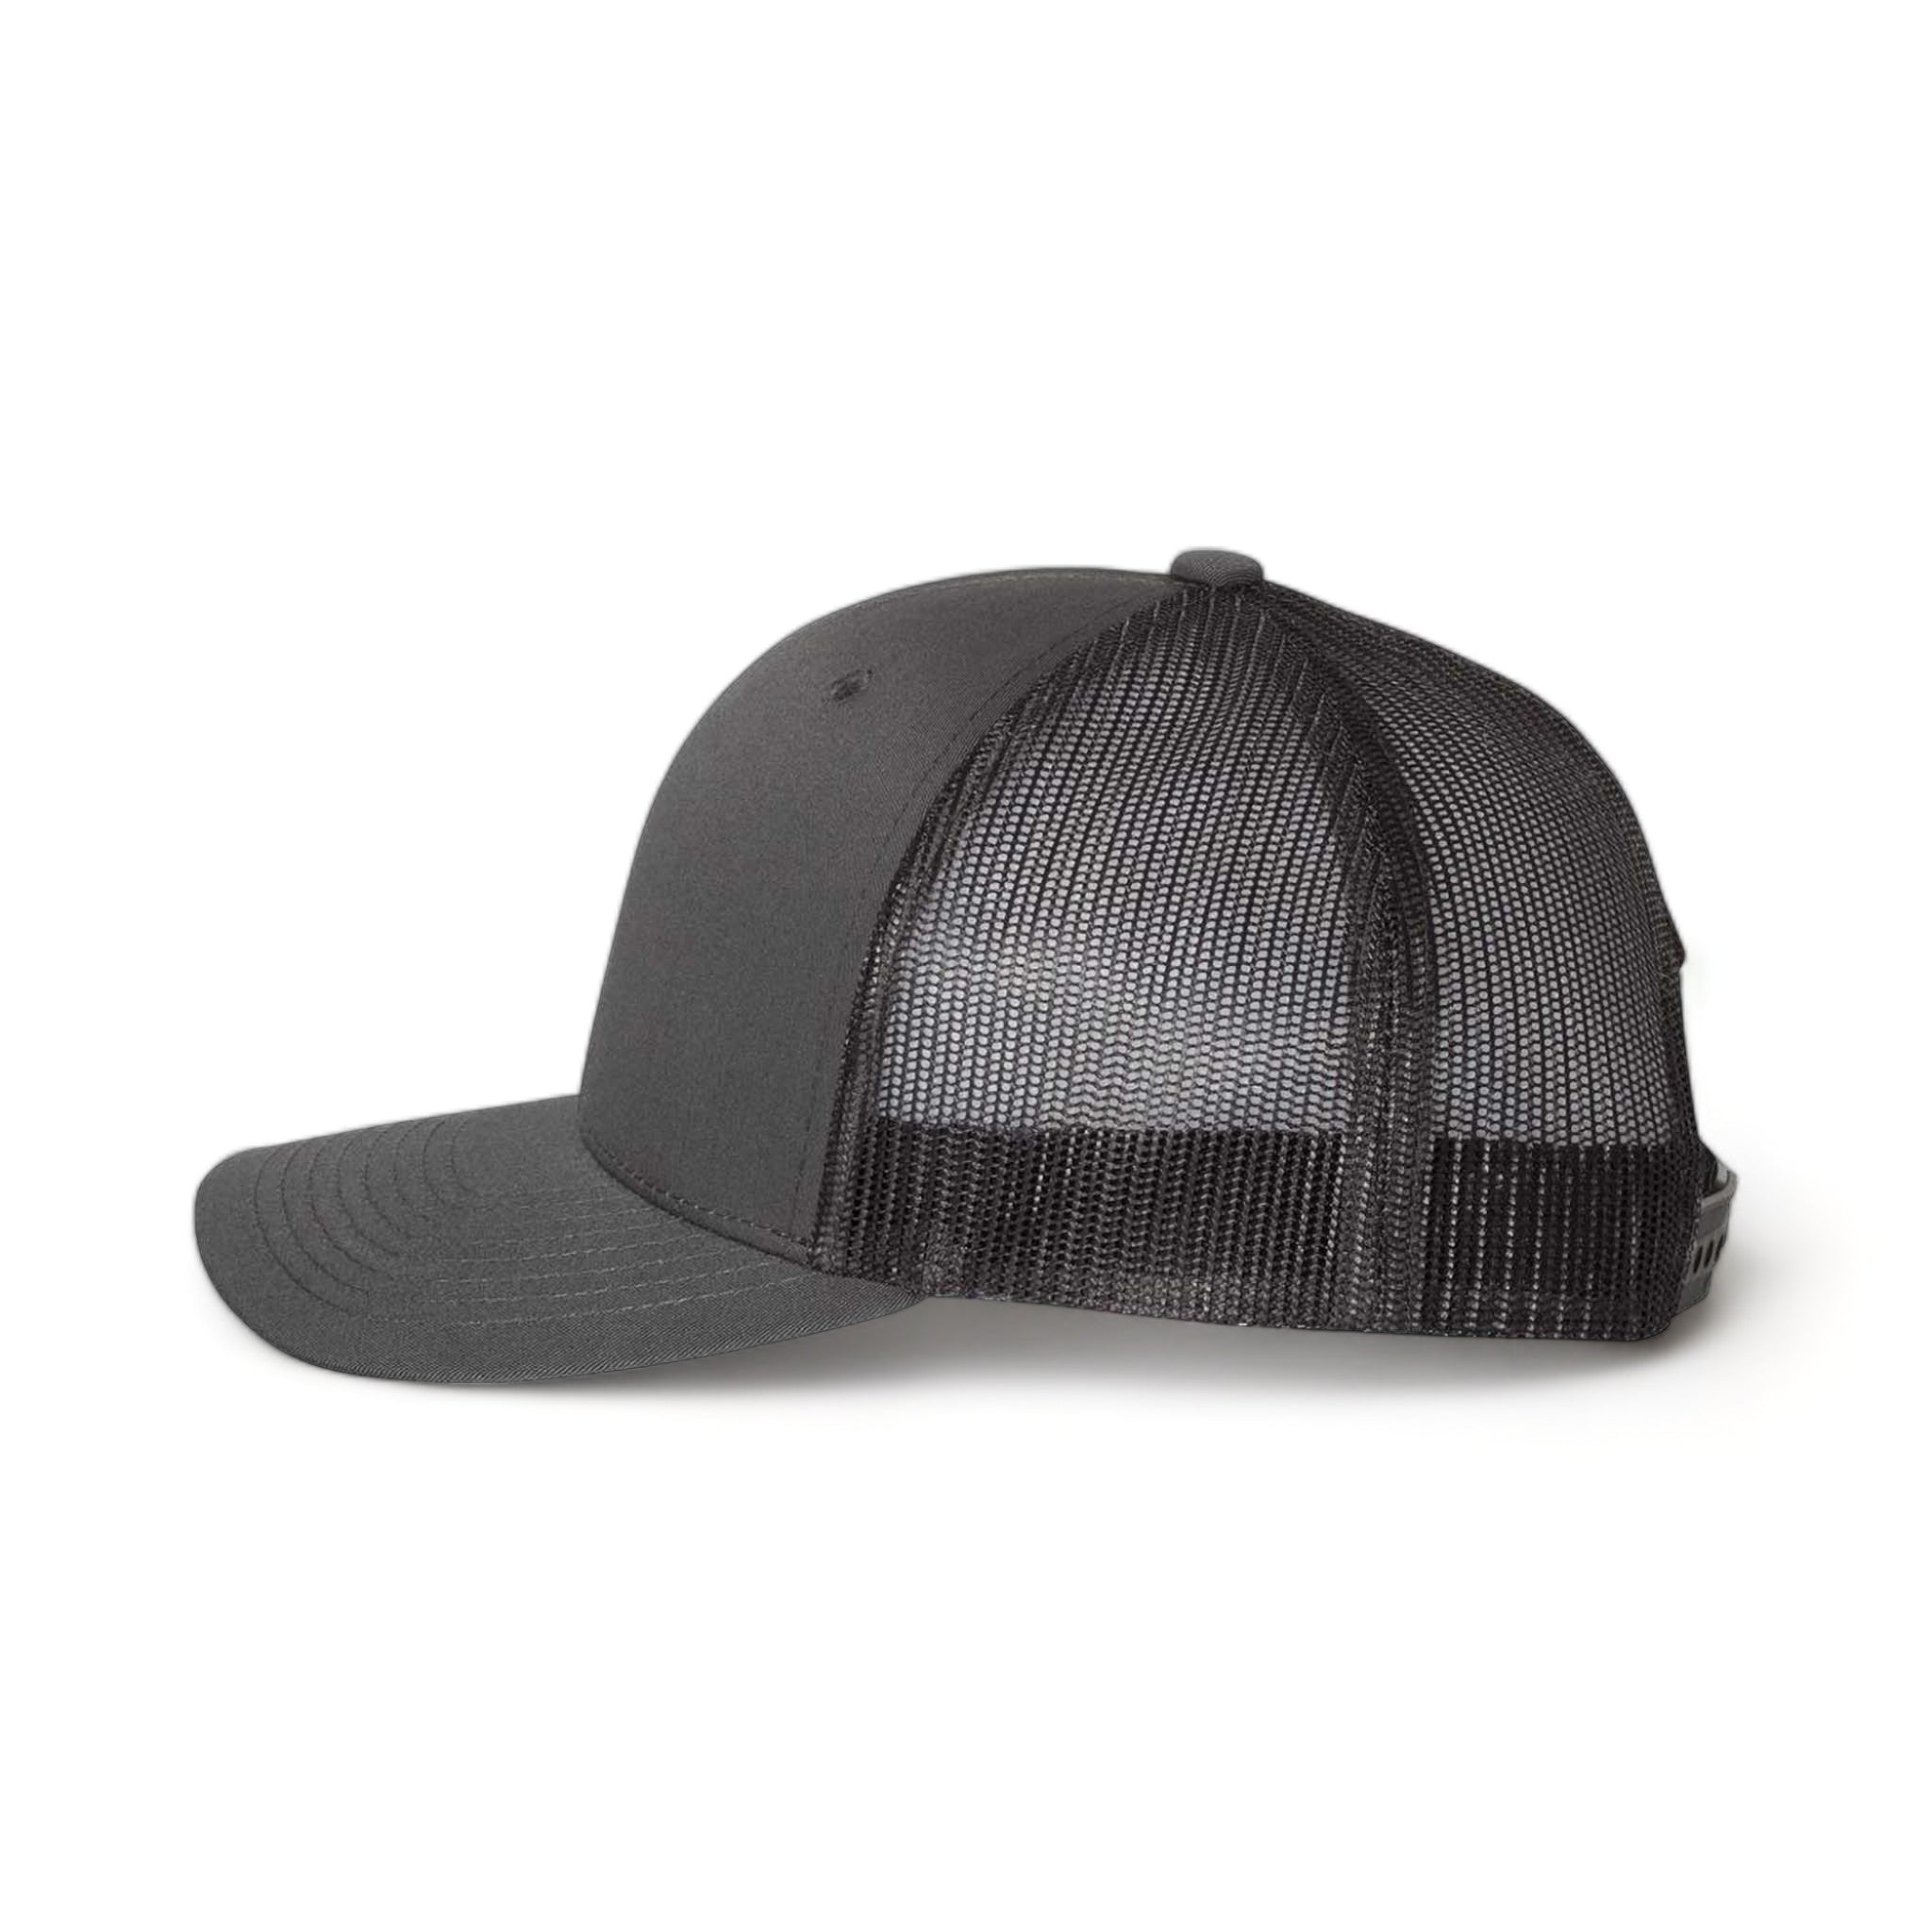 Side view of YP Classics 6606 custom hat in charcoal and black